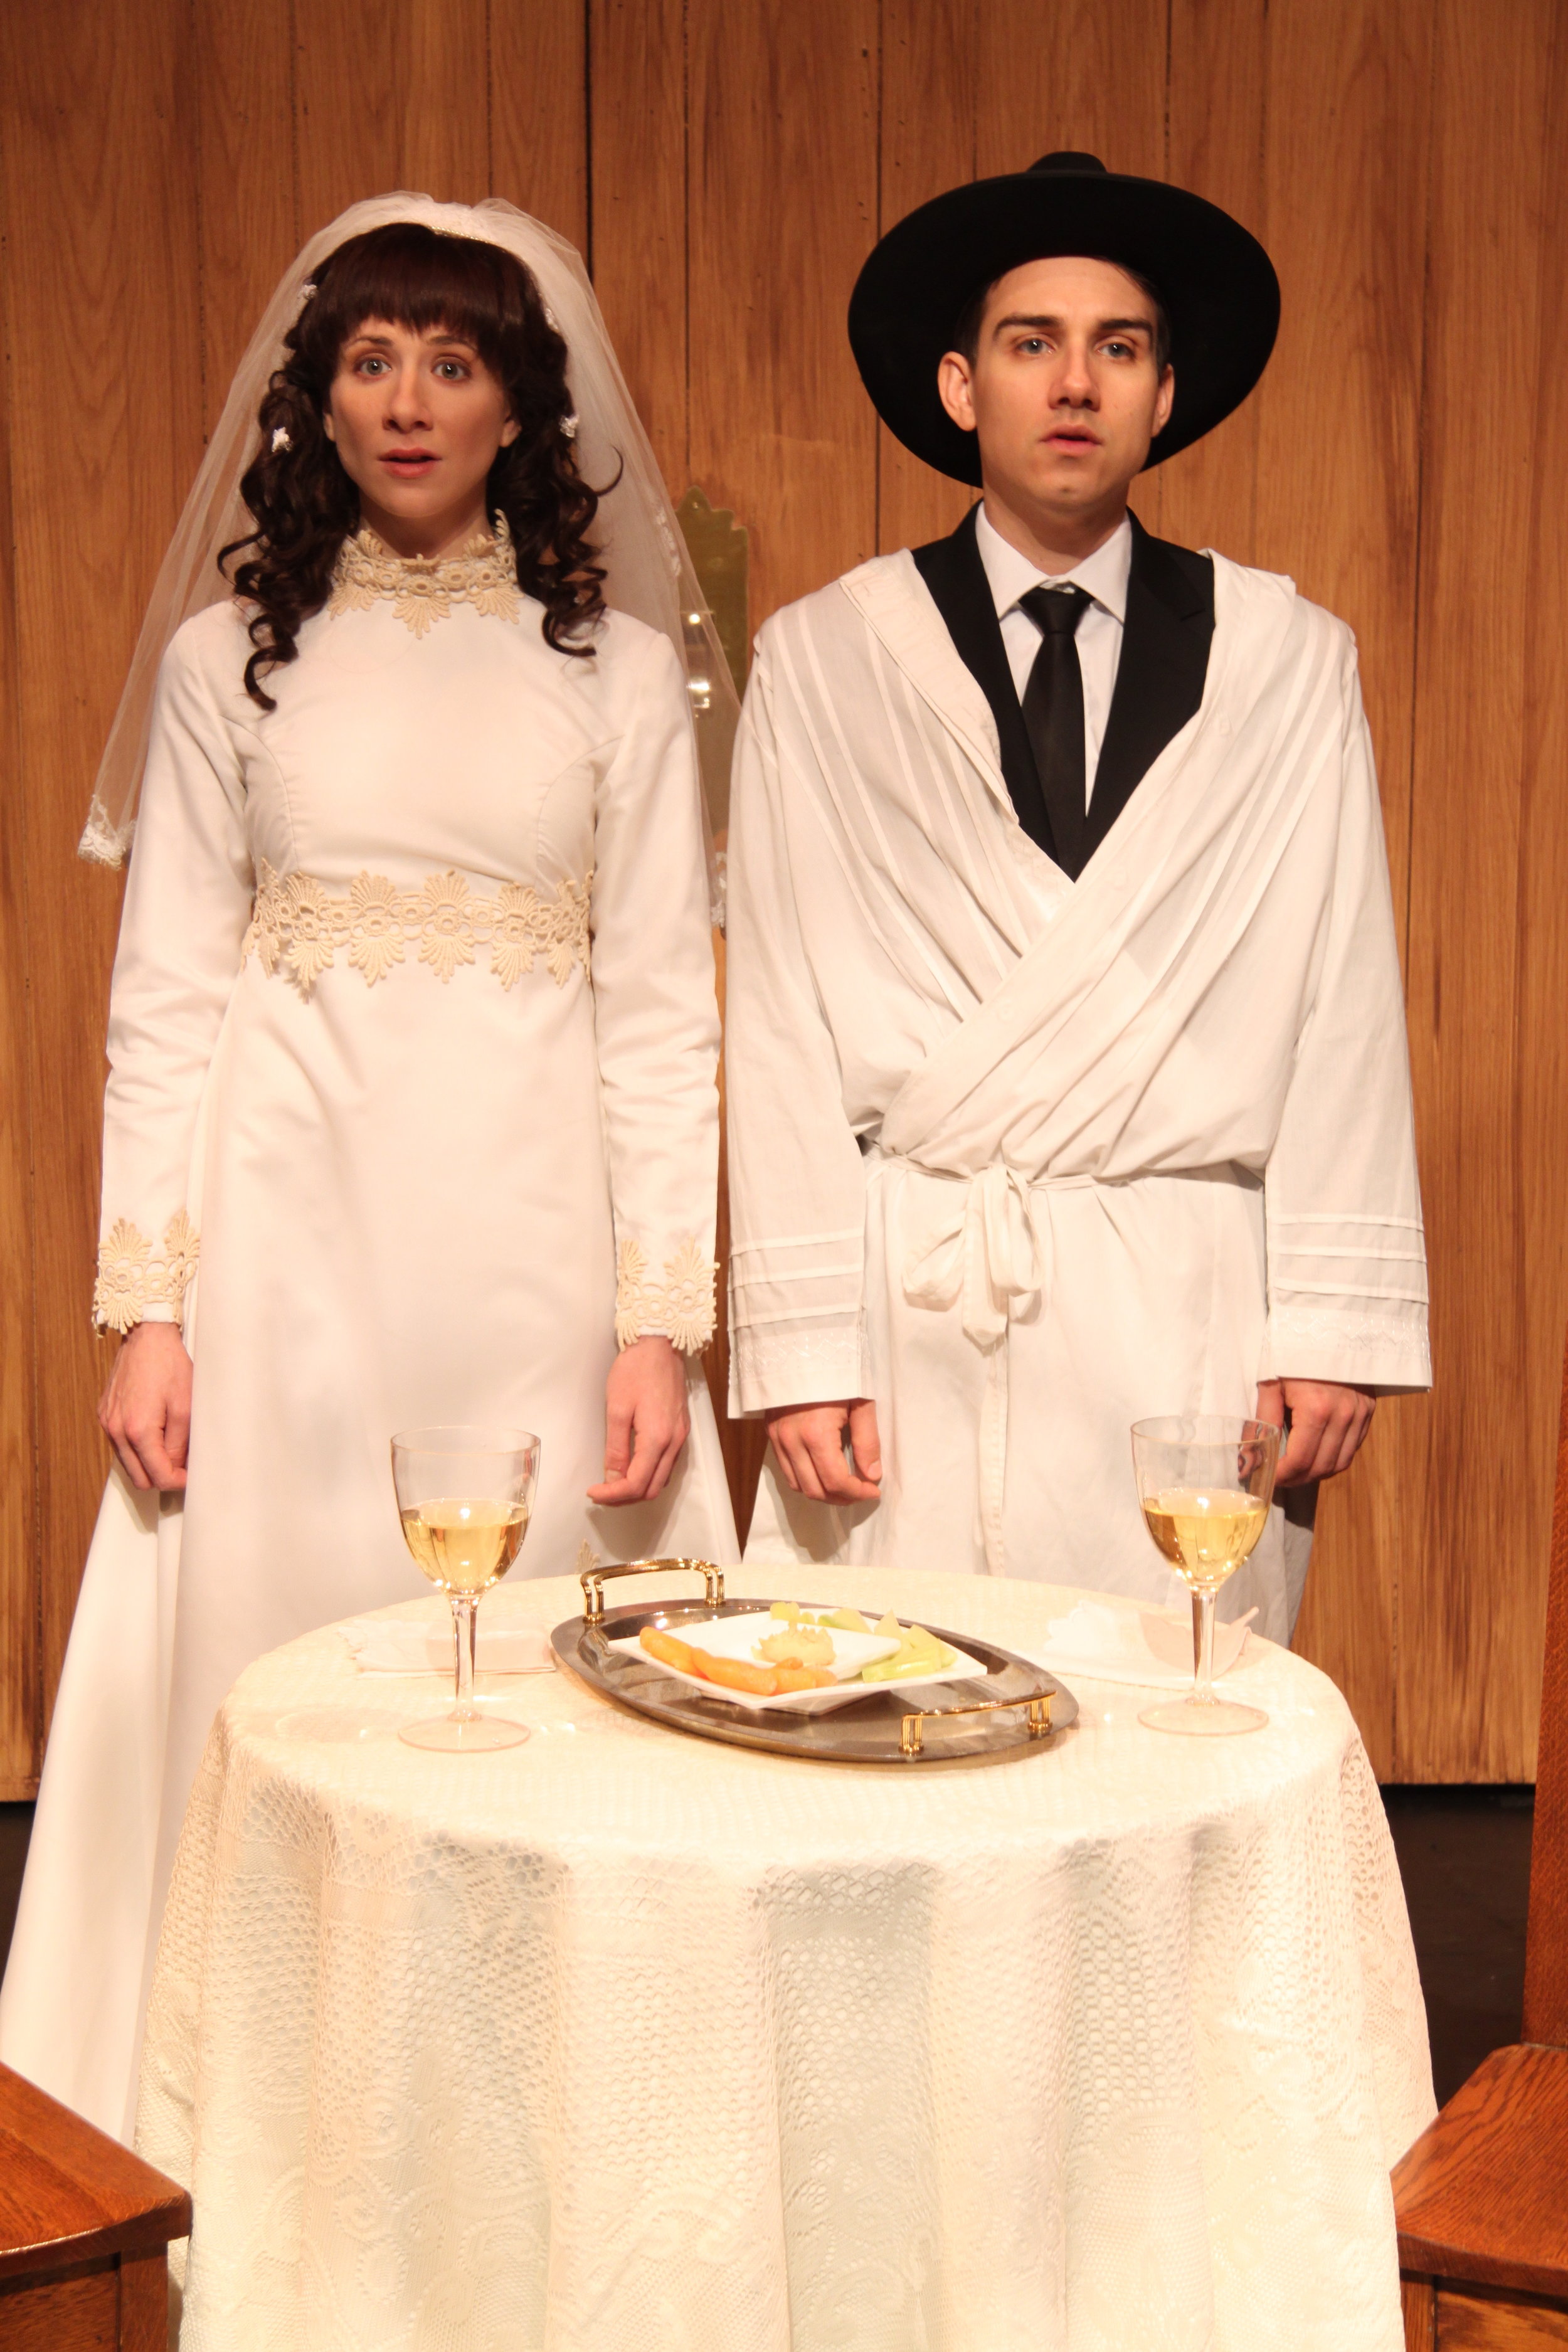  Julie Tepperman as Rachel and Aaron Willis as Chaim in YICHUD (Seclusion) 